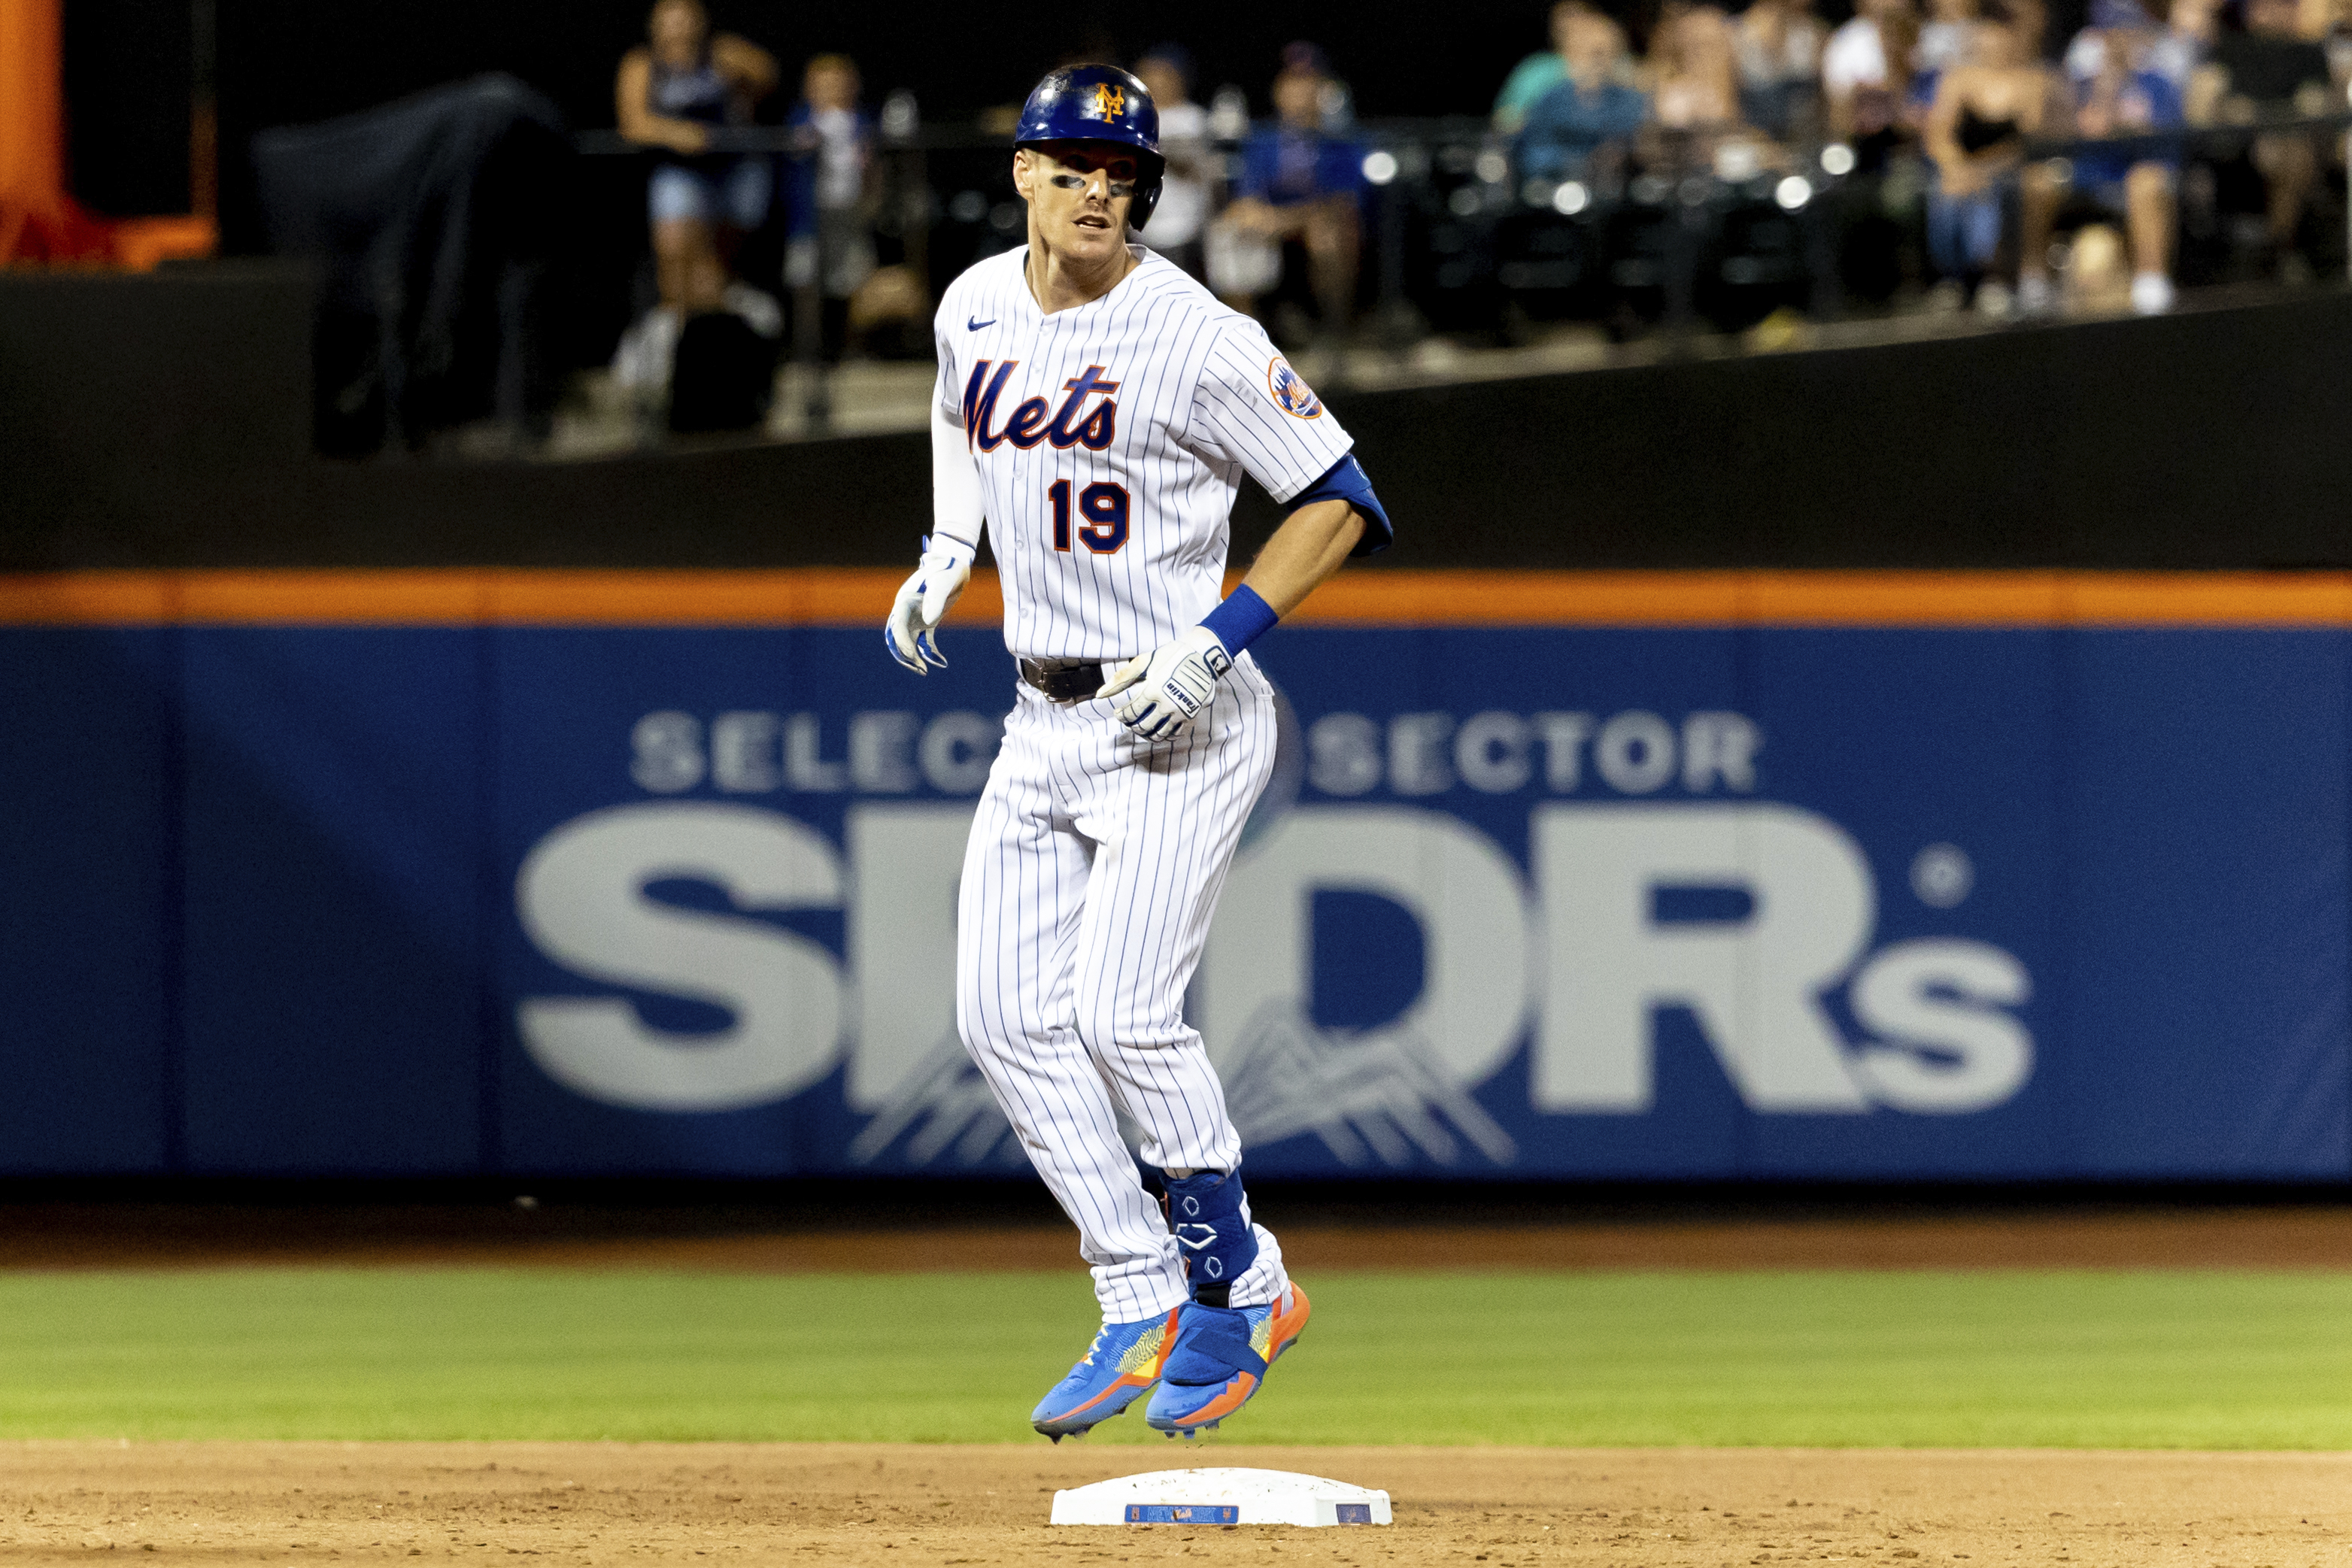 Yankees vs. Mets prediction and best bet for July 27, 2022 